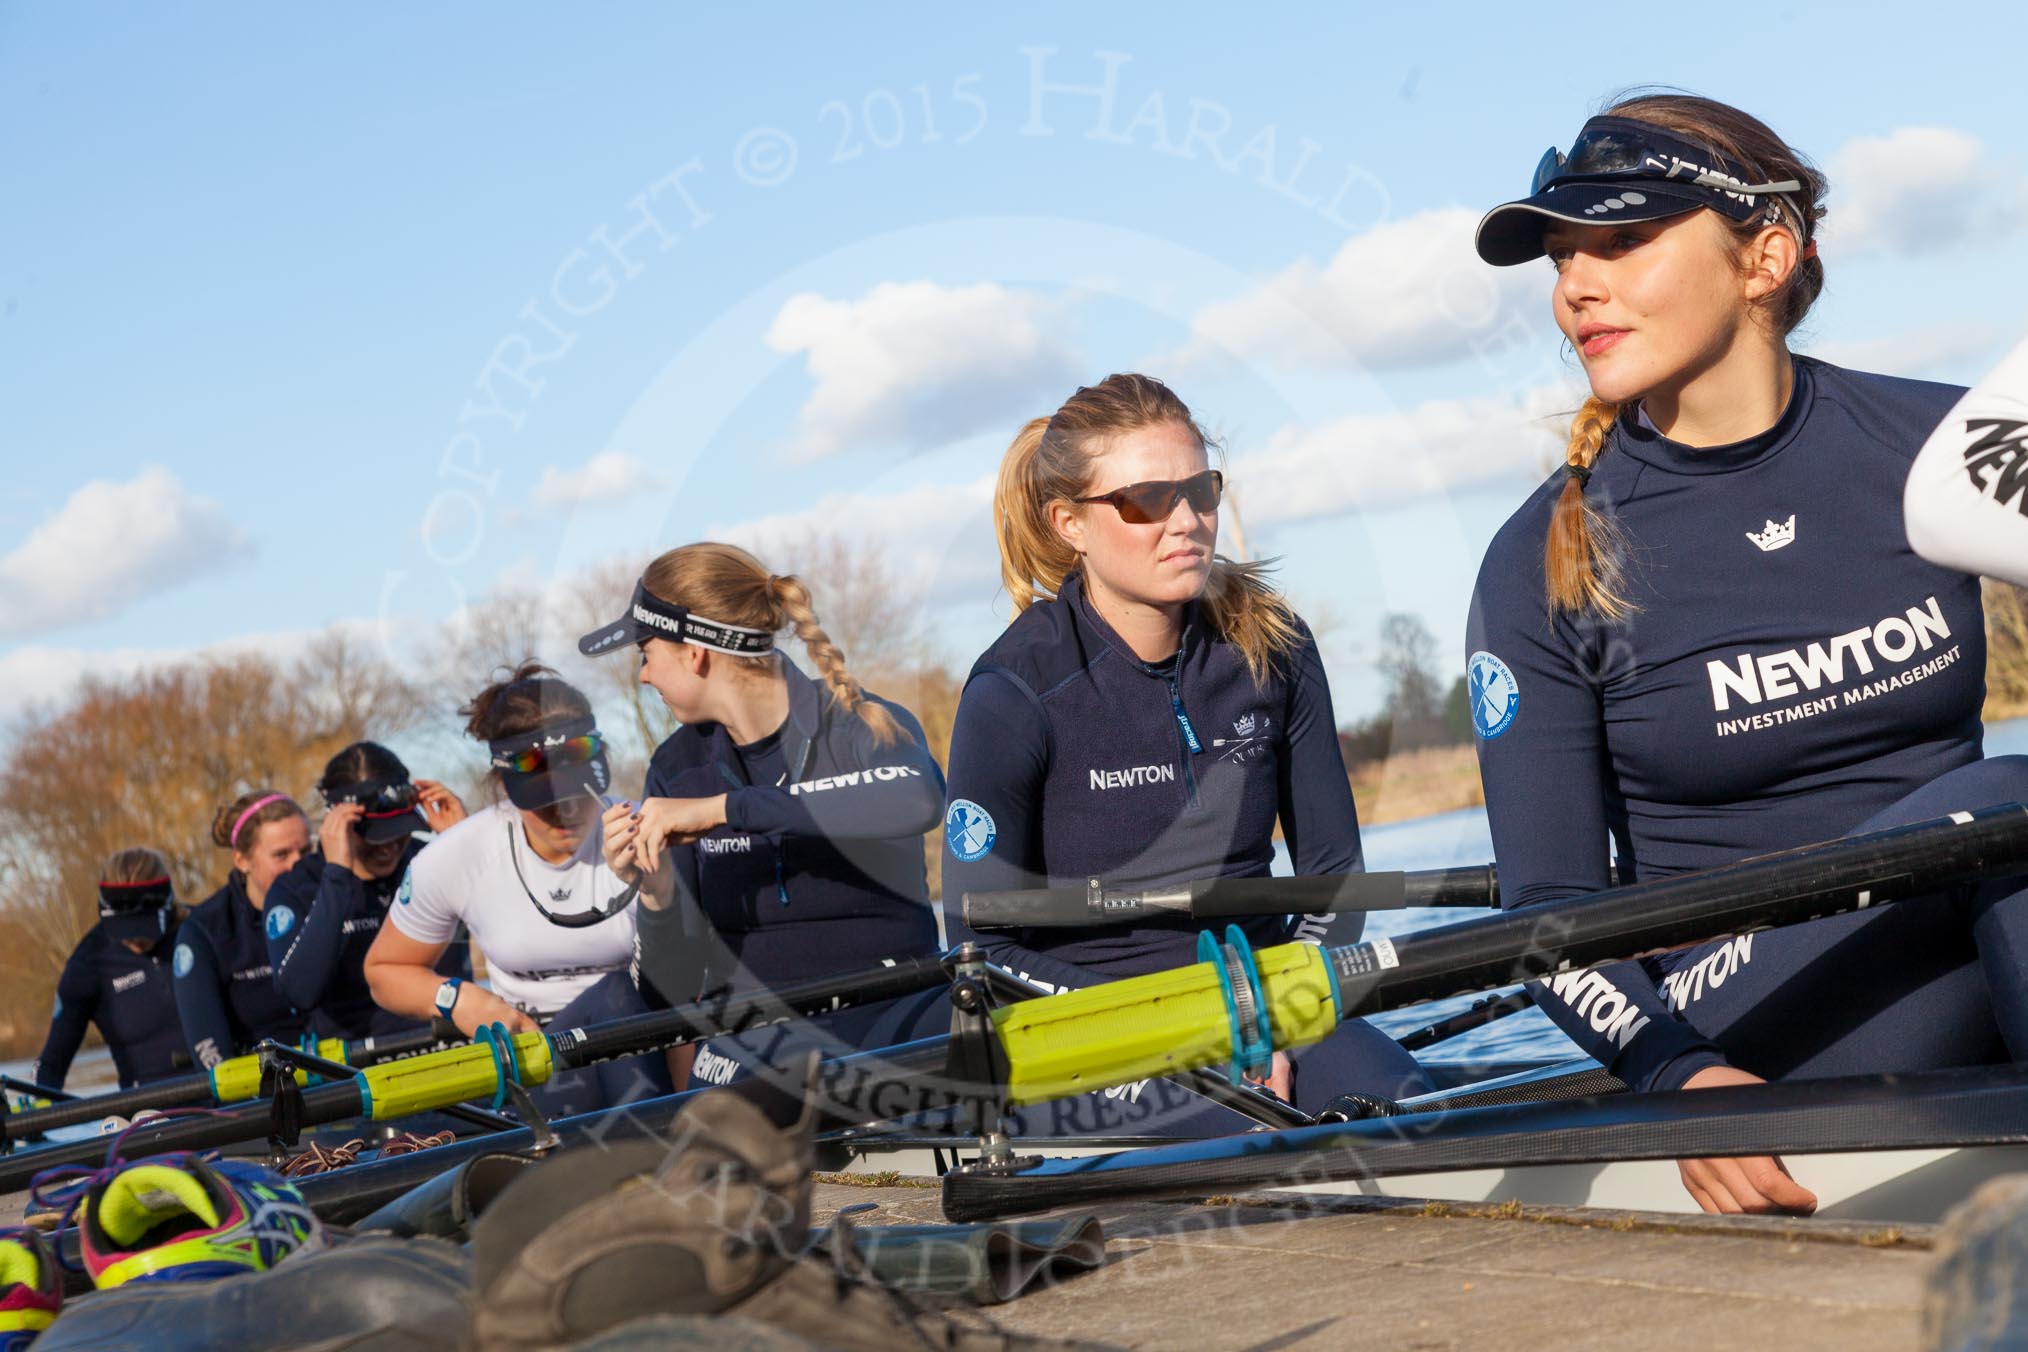 The Boat Race season 2015: OUWBC training Wallingford.

Wallingford,

United Kingdom,
on 04 March 2015 at 15:28, image #23